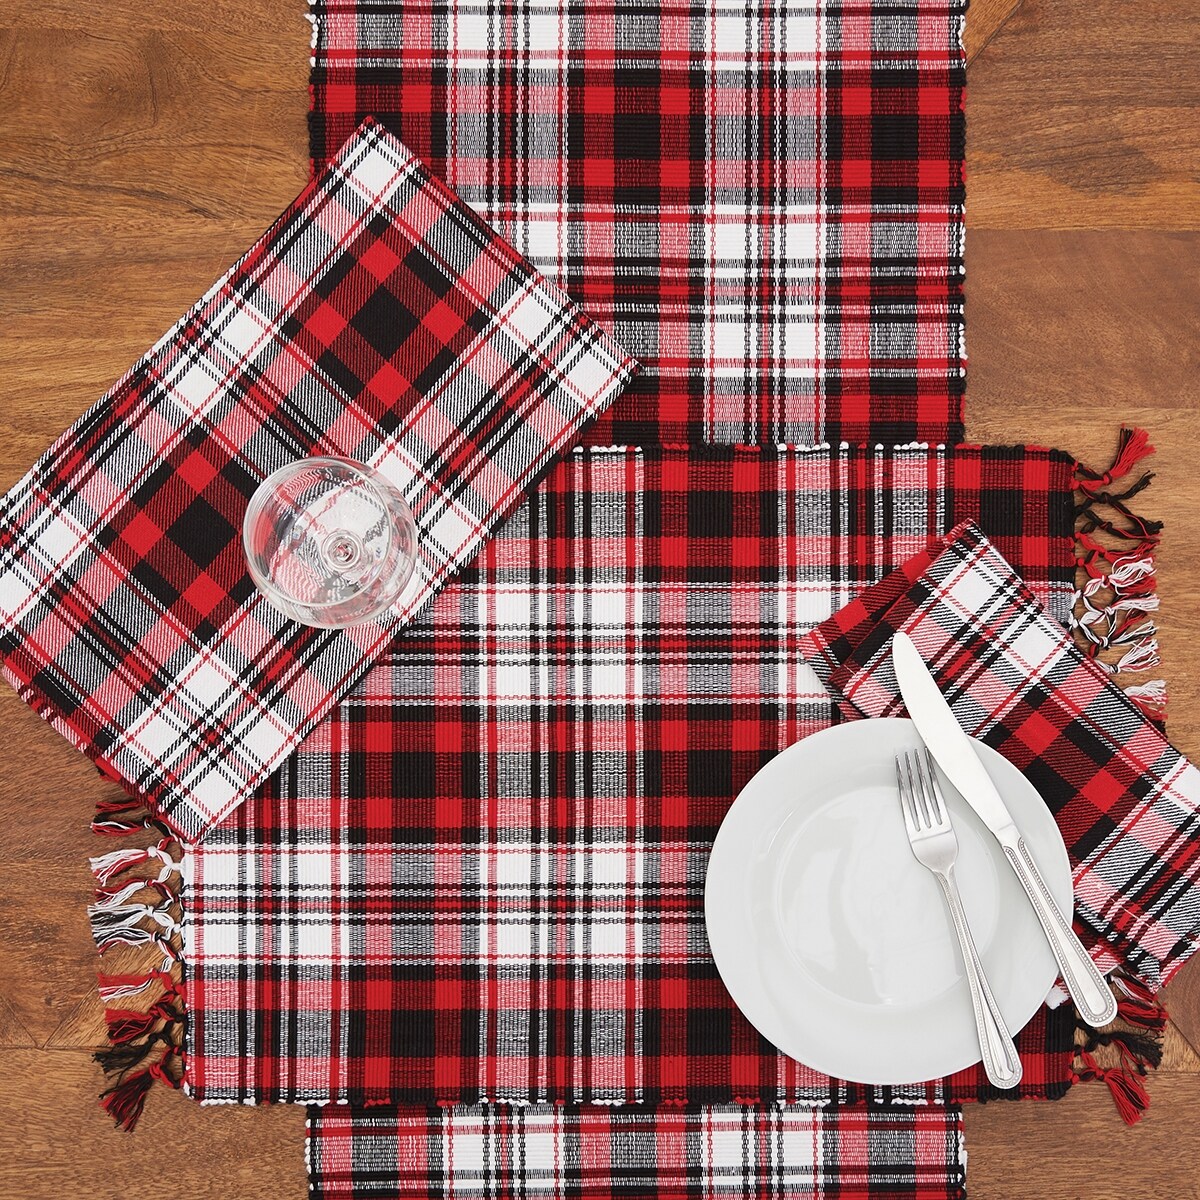 https://ak1.ostkcdn.com/images/products/is/images/direct/3457a98f1a0f971592620b32b117907a5e0910f5/Fireside-Plaid-Red-and-Black-Woven-Cotton-Kitchen-Towel.jpg